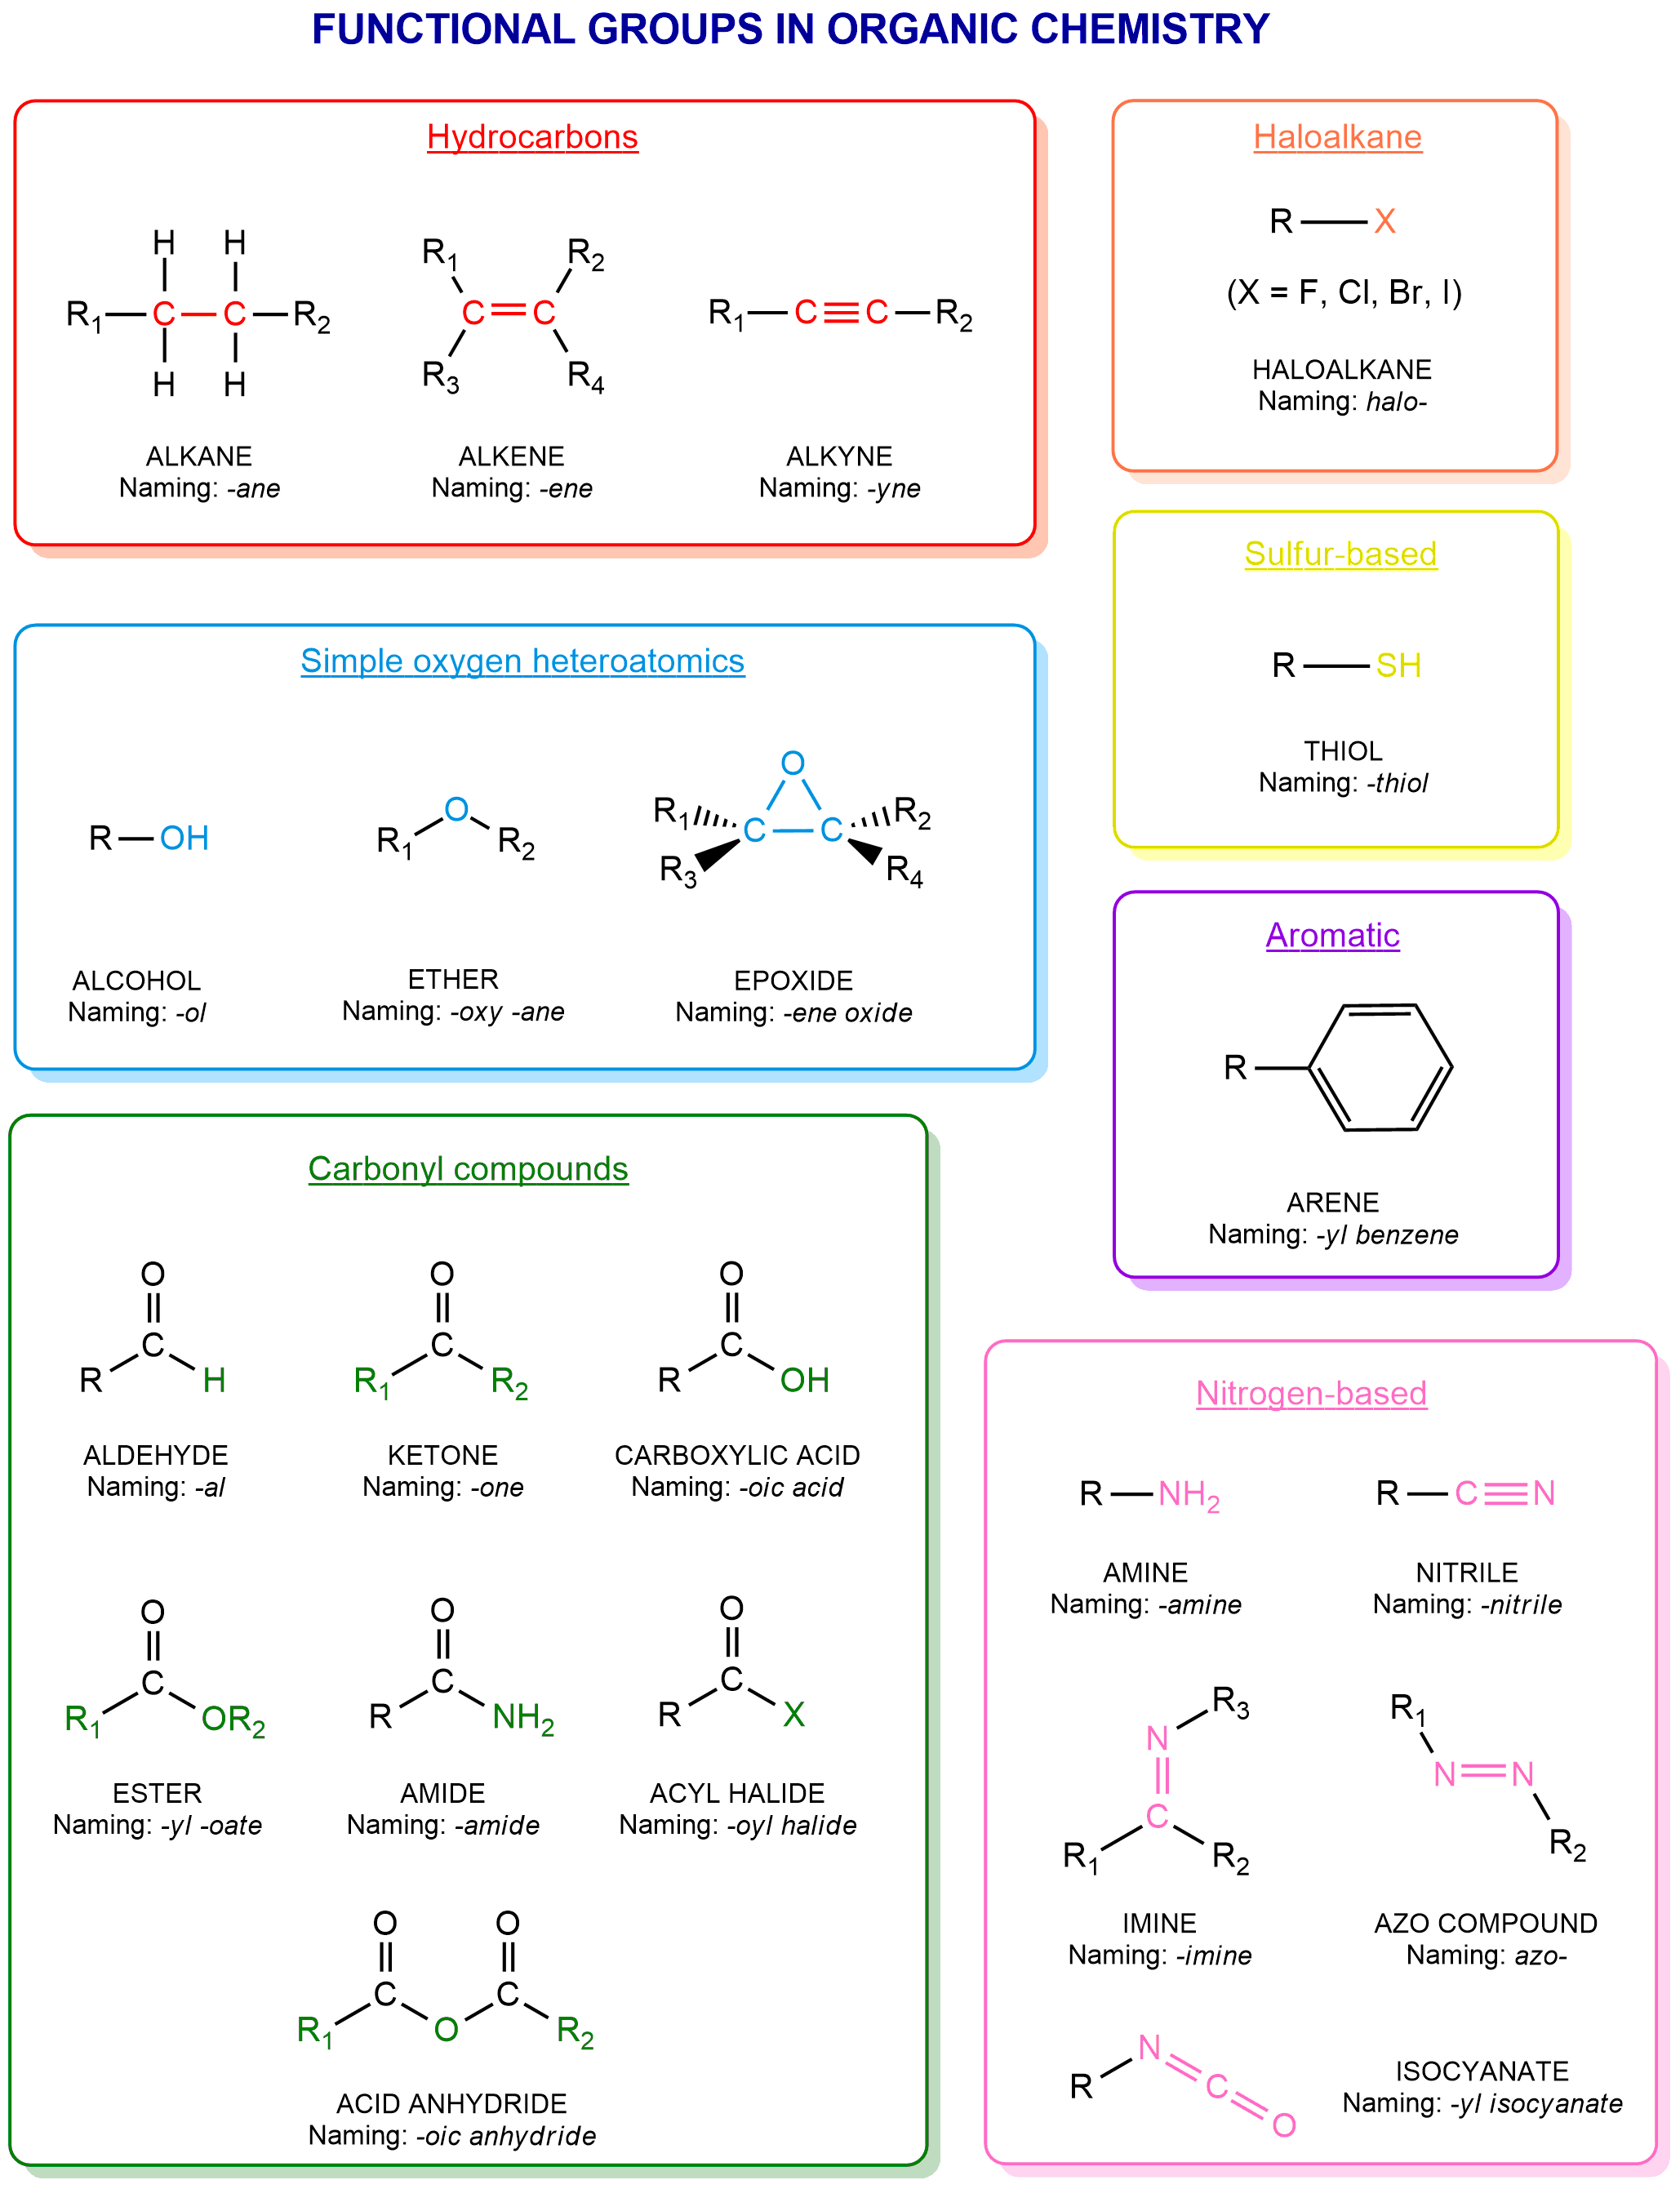 Functional Groups In Organic Chemistry Chemistryscore